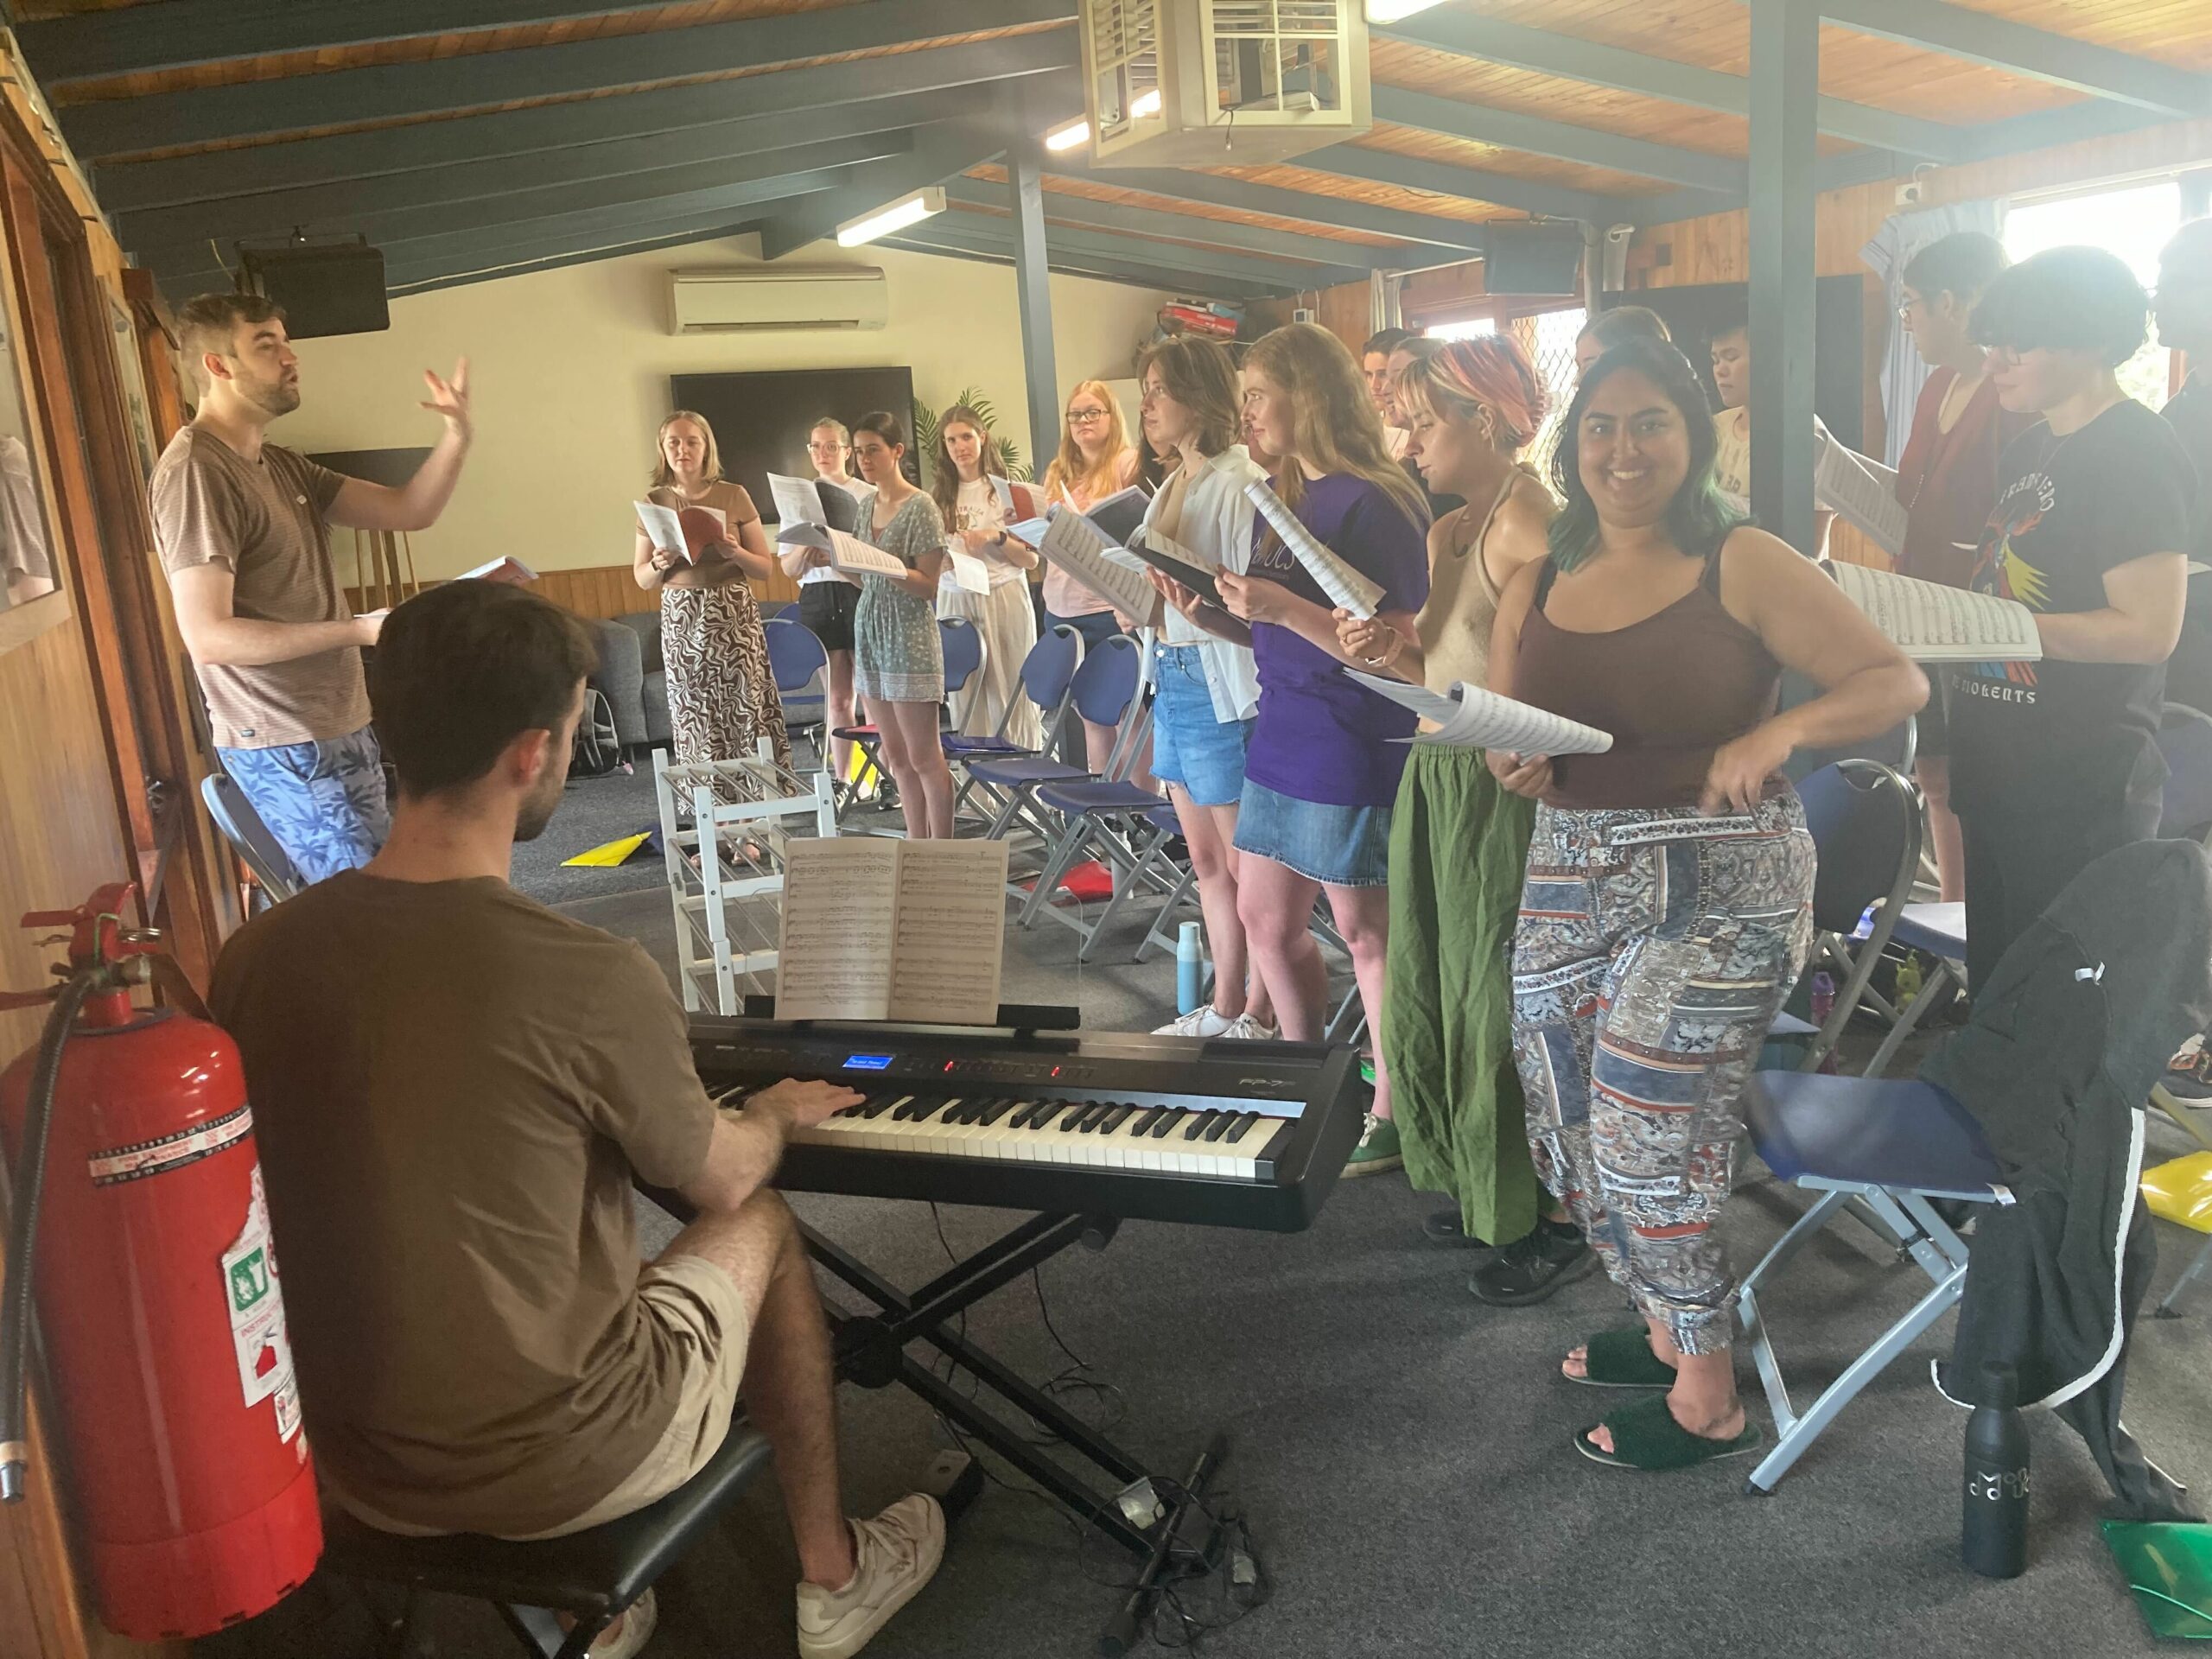 Another busy moment of rehearsal - our perspective is from behind our pianist, and we see standing rows of choristers holding sheet music, a couple of whom look towards the camera and smile